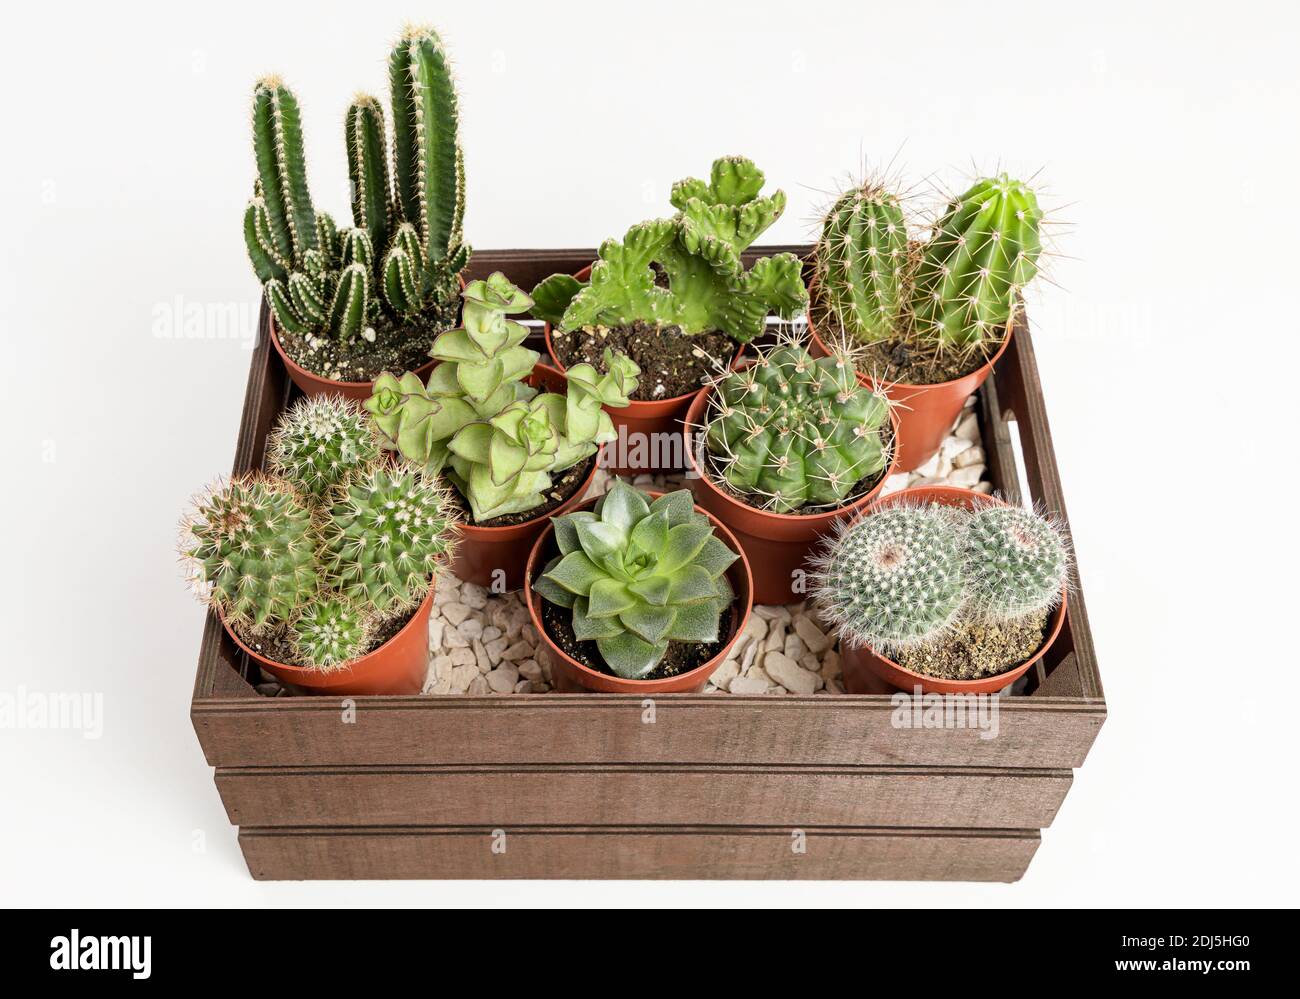 Group of cactus and succulents in a wooden box on a white table Stock Photo